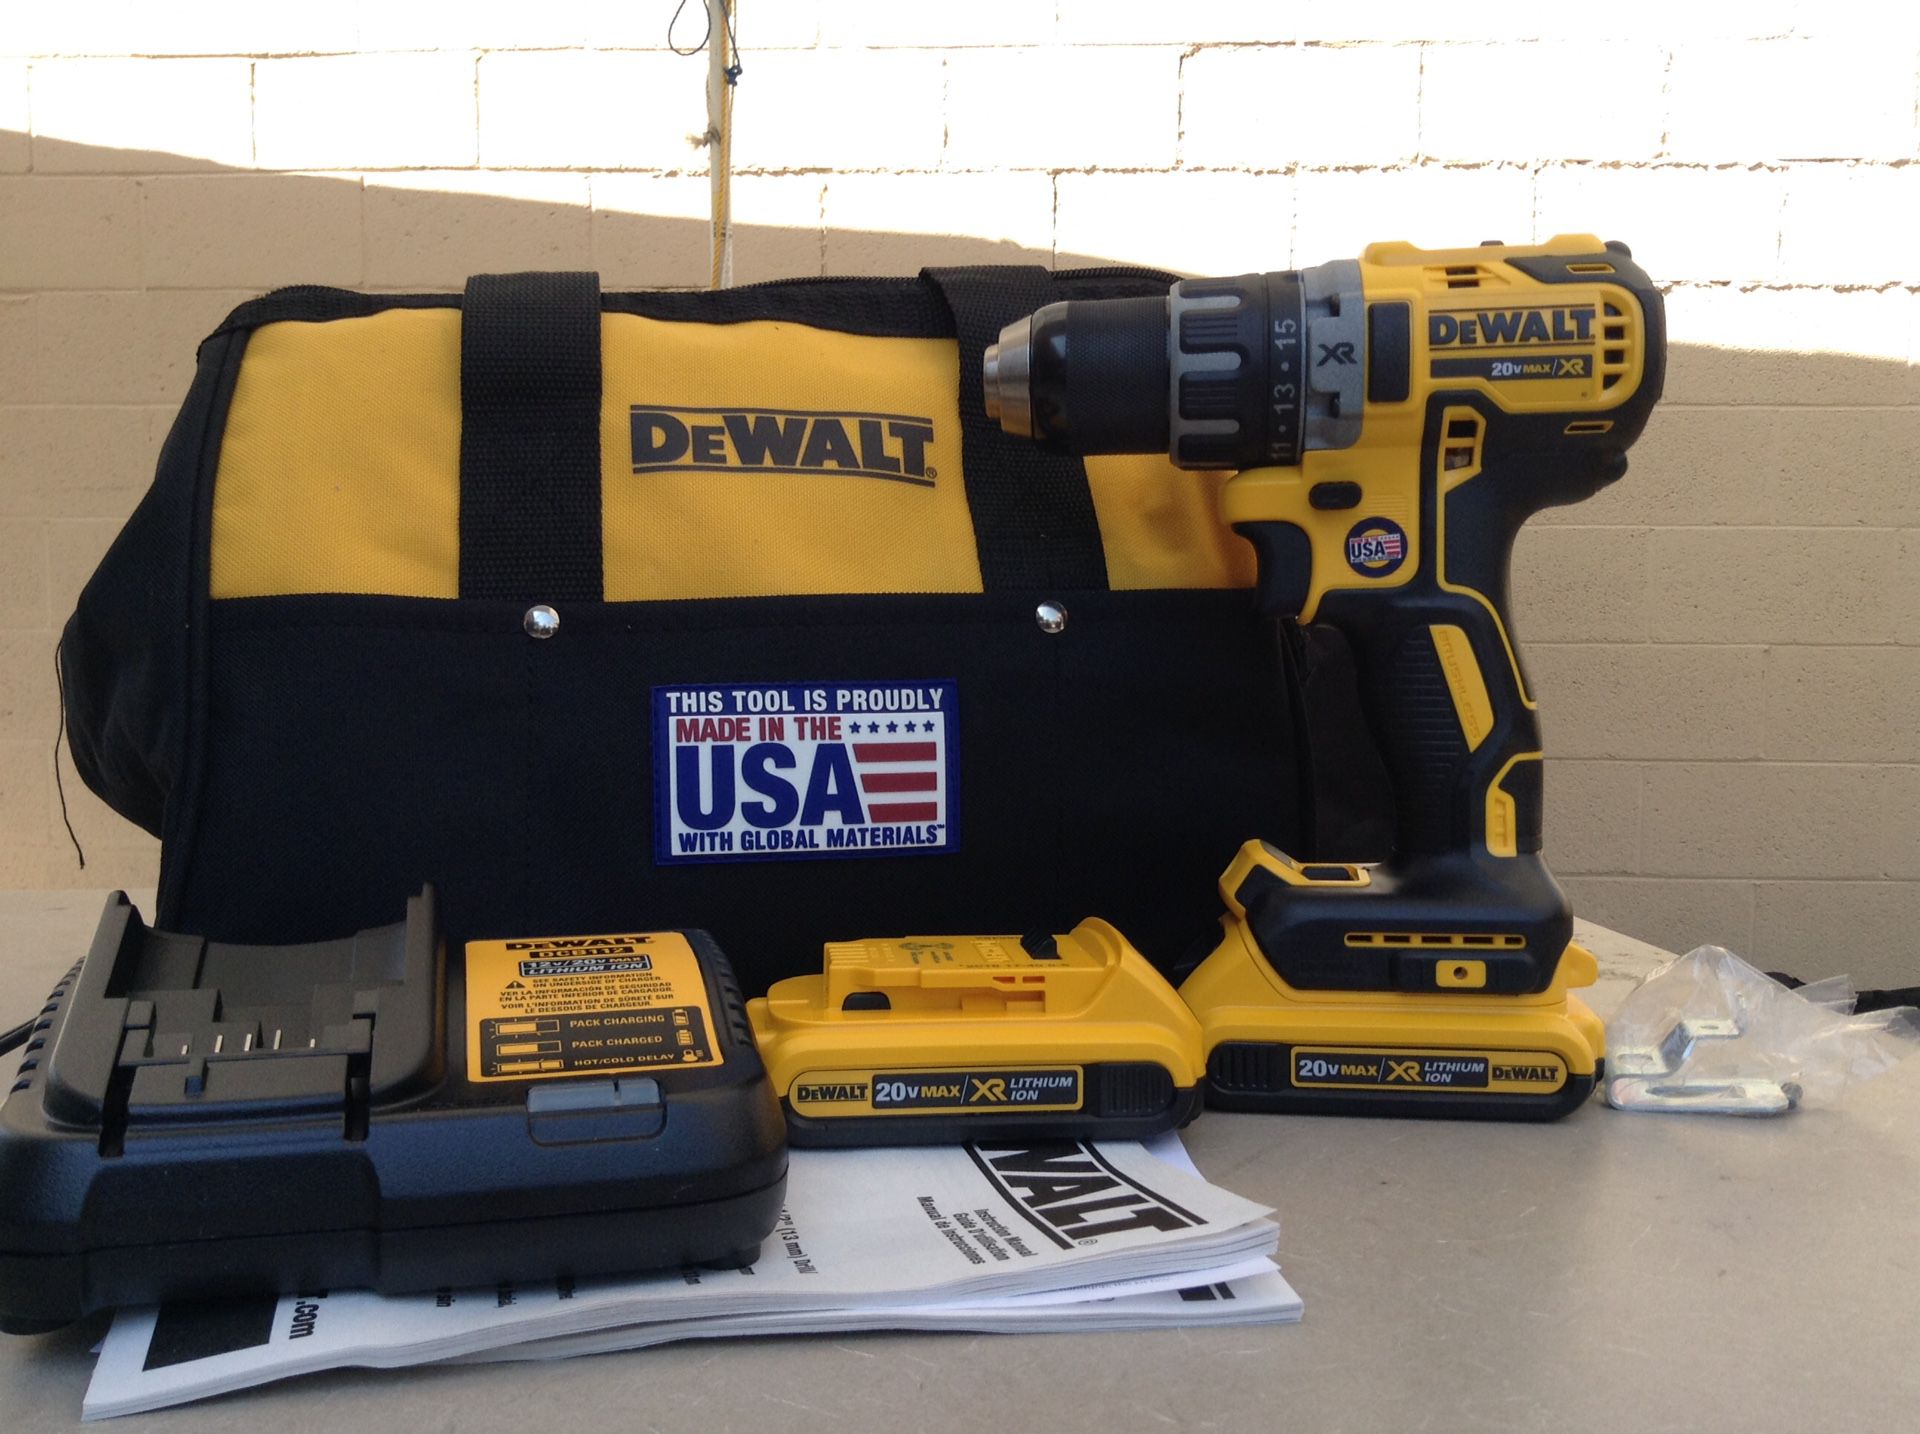 DEWALT DCD791 20V MAX XR LI-ION BRUSHLESS COMPACT DRILL DRIVER WITH (2) BATTERIES (1) CHARGER AND TOOL for Sale Lakewood, CA - OfferUp